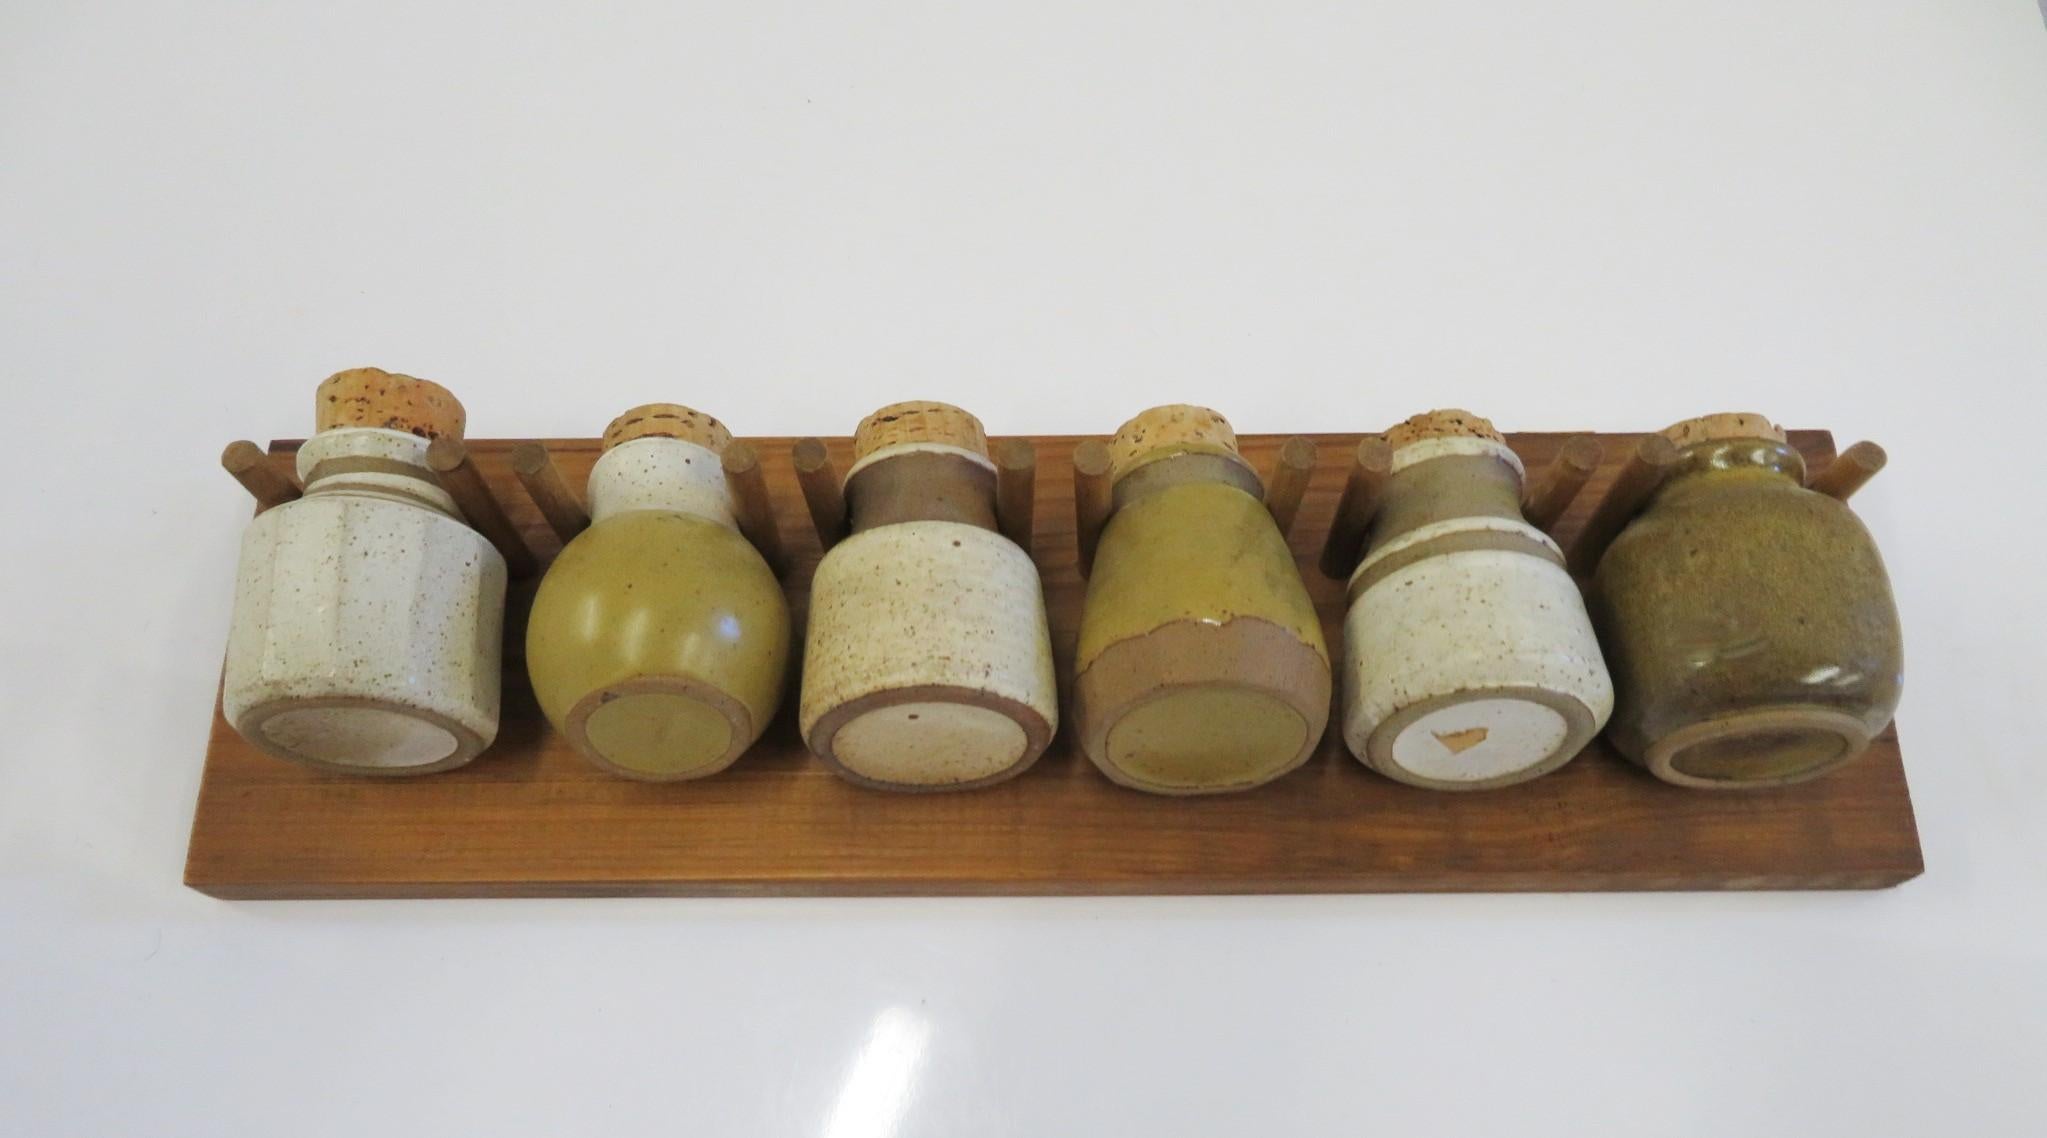 American 1970s Organic Modern Kitchen Wall Spice Rack with Pottery Jars Cork Tops